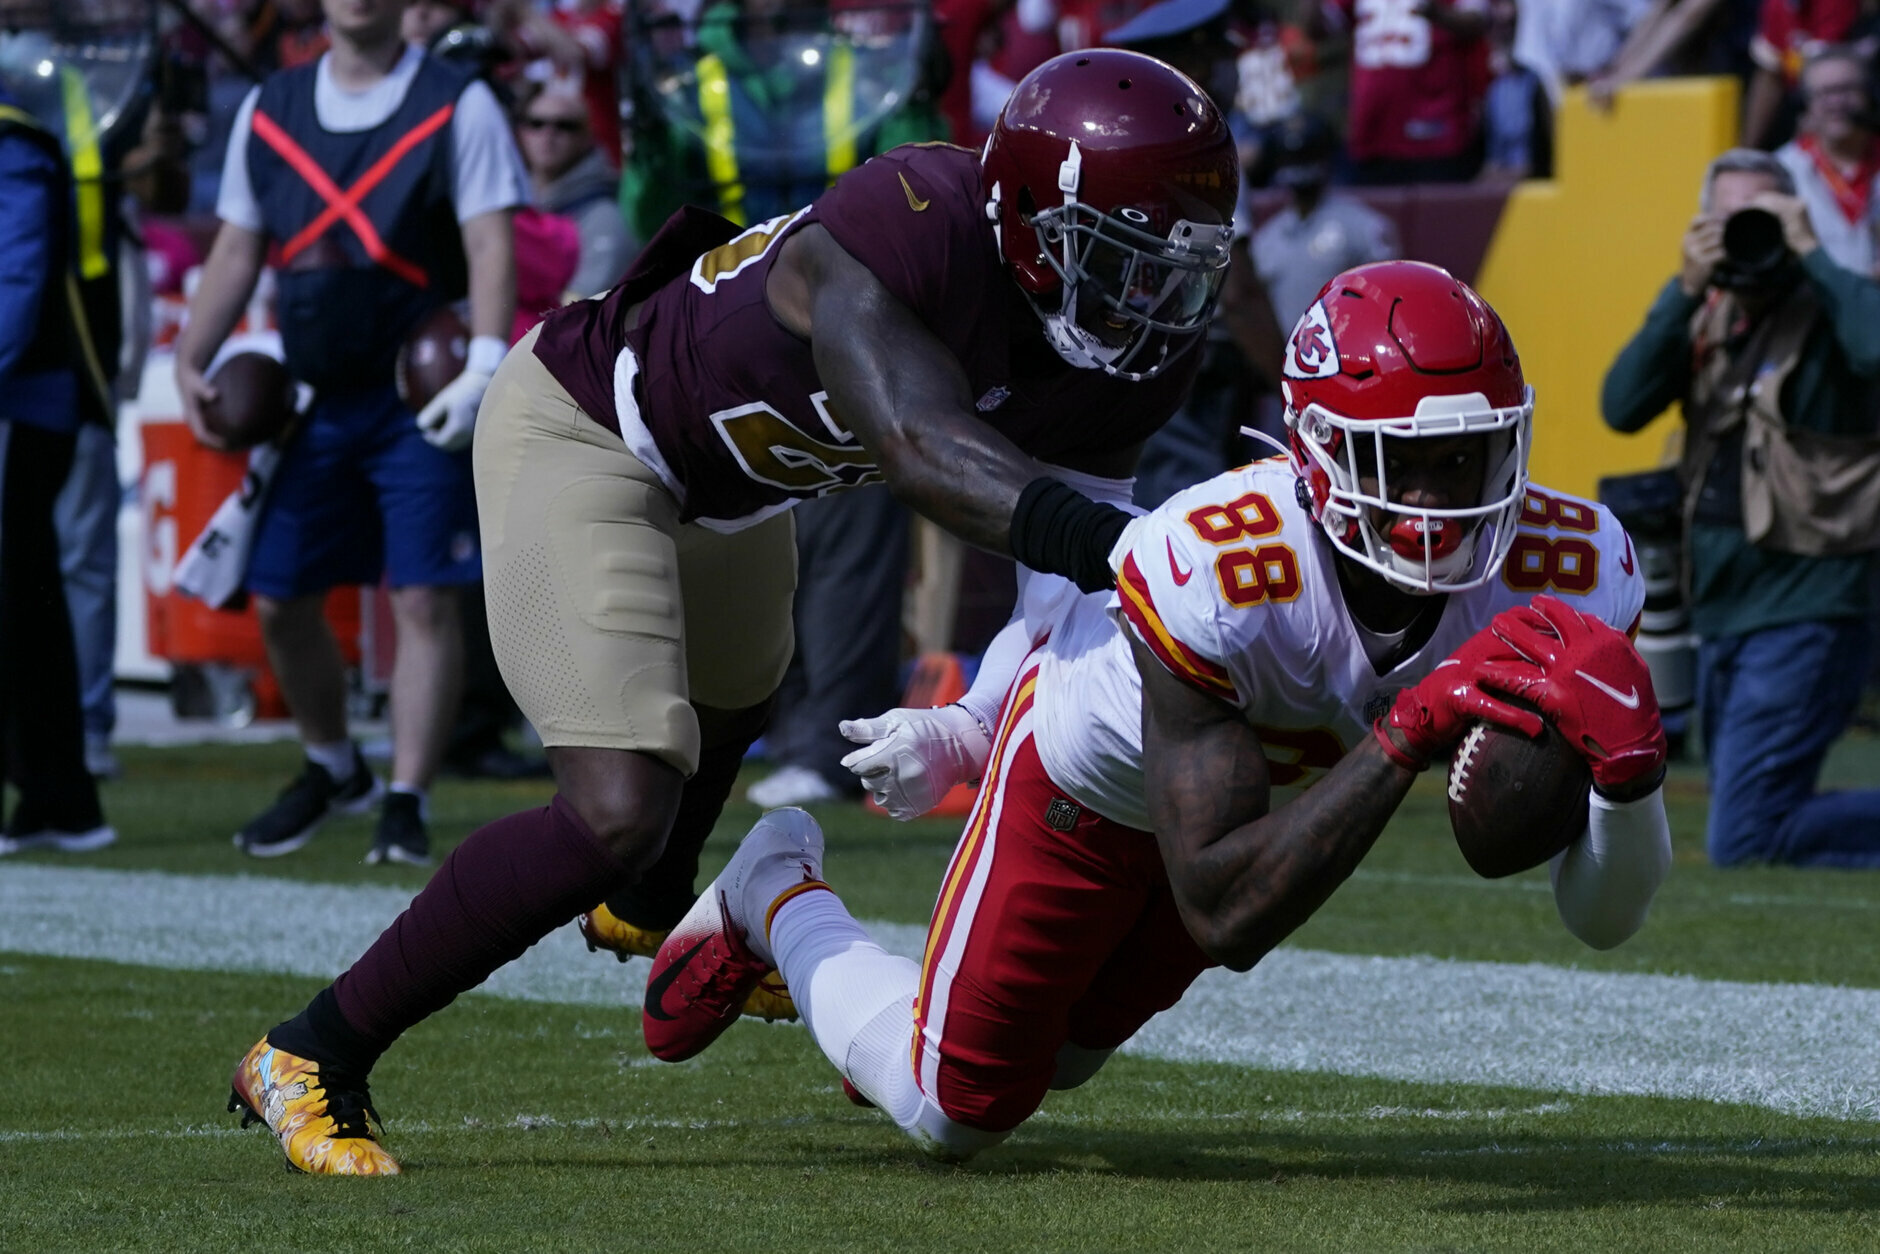 <p><b><i>Chiefs 31</i></b><br />
<b><i>Washington 13</i></b></p>
<p>Given <a href="https://profootballtalk.nbcsports.com/2021/10/14/washington-picks-bad-time-to-finally-retire-sean-taylors-number/">Washington&#8217;s questionable timing of the retirement of the late Sean Taylor&#8217;s No. 21</a>, it was almost fitting that Kansas City won by reeling off 21 unanswered points against the underachieving defense that&#8217;s currently nowhere near the units Taylor played on in the mid-2000s. Yet, somehow the offense was the most disappointing of all &#8212; if that unit can&#8217;t score on <a href="https://profootballtalk.nbcsports.com/2021/10/11/chiefs-defense-allowing-7-1-yards-per-play-worst-in-nfl-history/">a historically bad defense ranked dead last in points allowed</a>, what chance do they have moving forward?</p>
